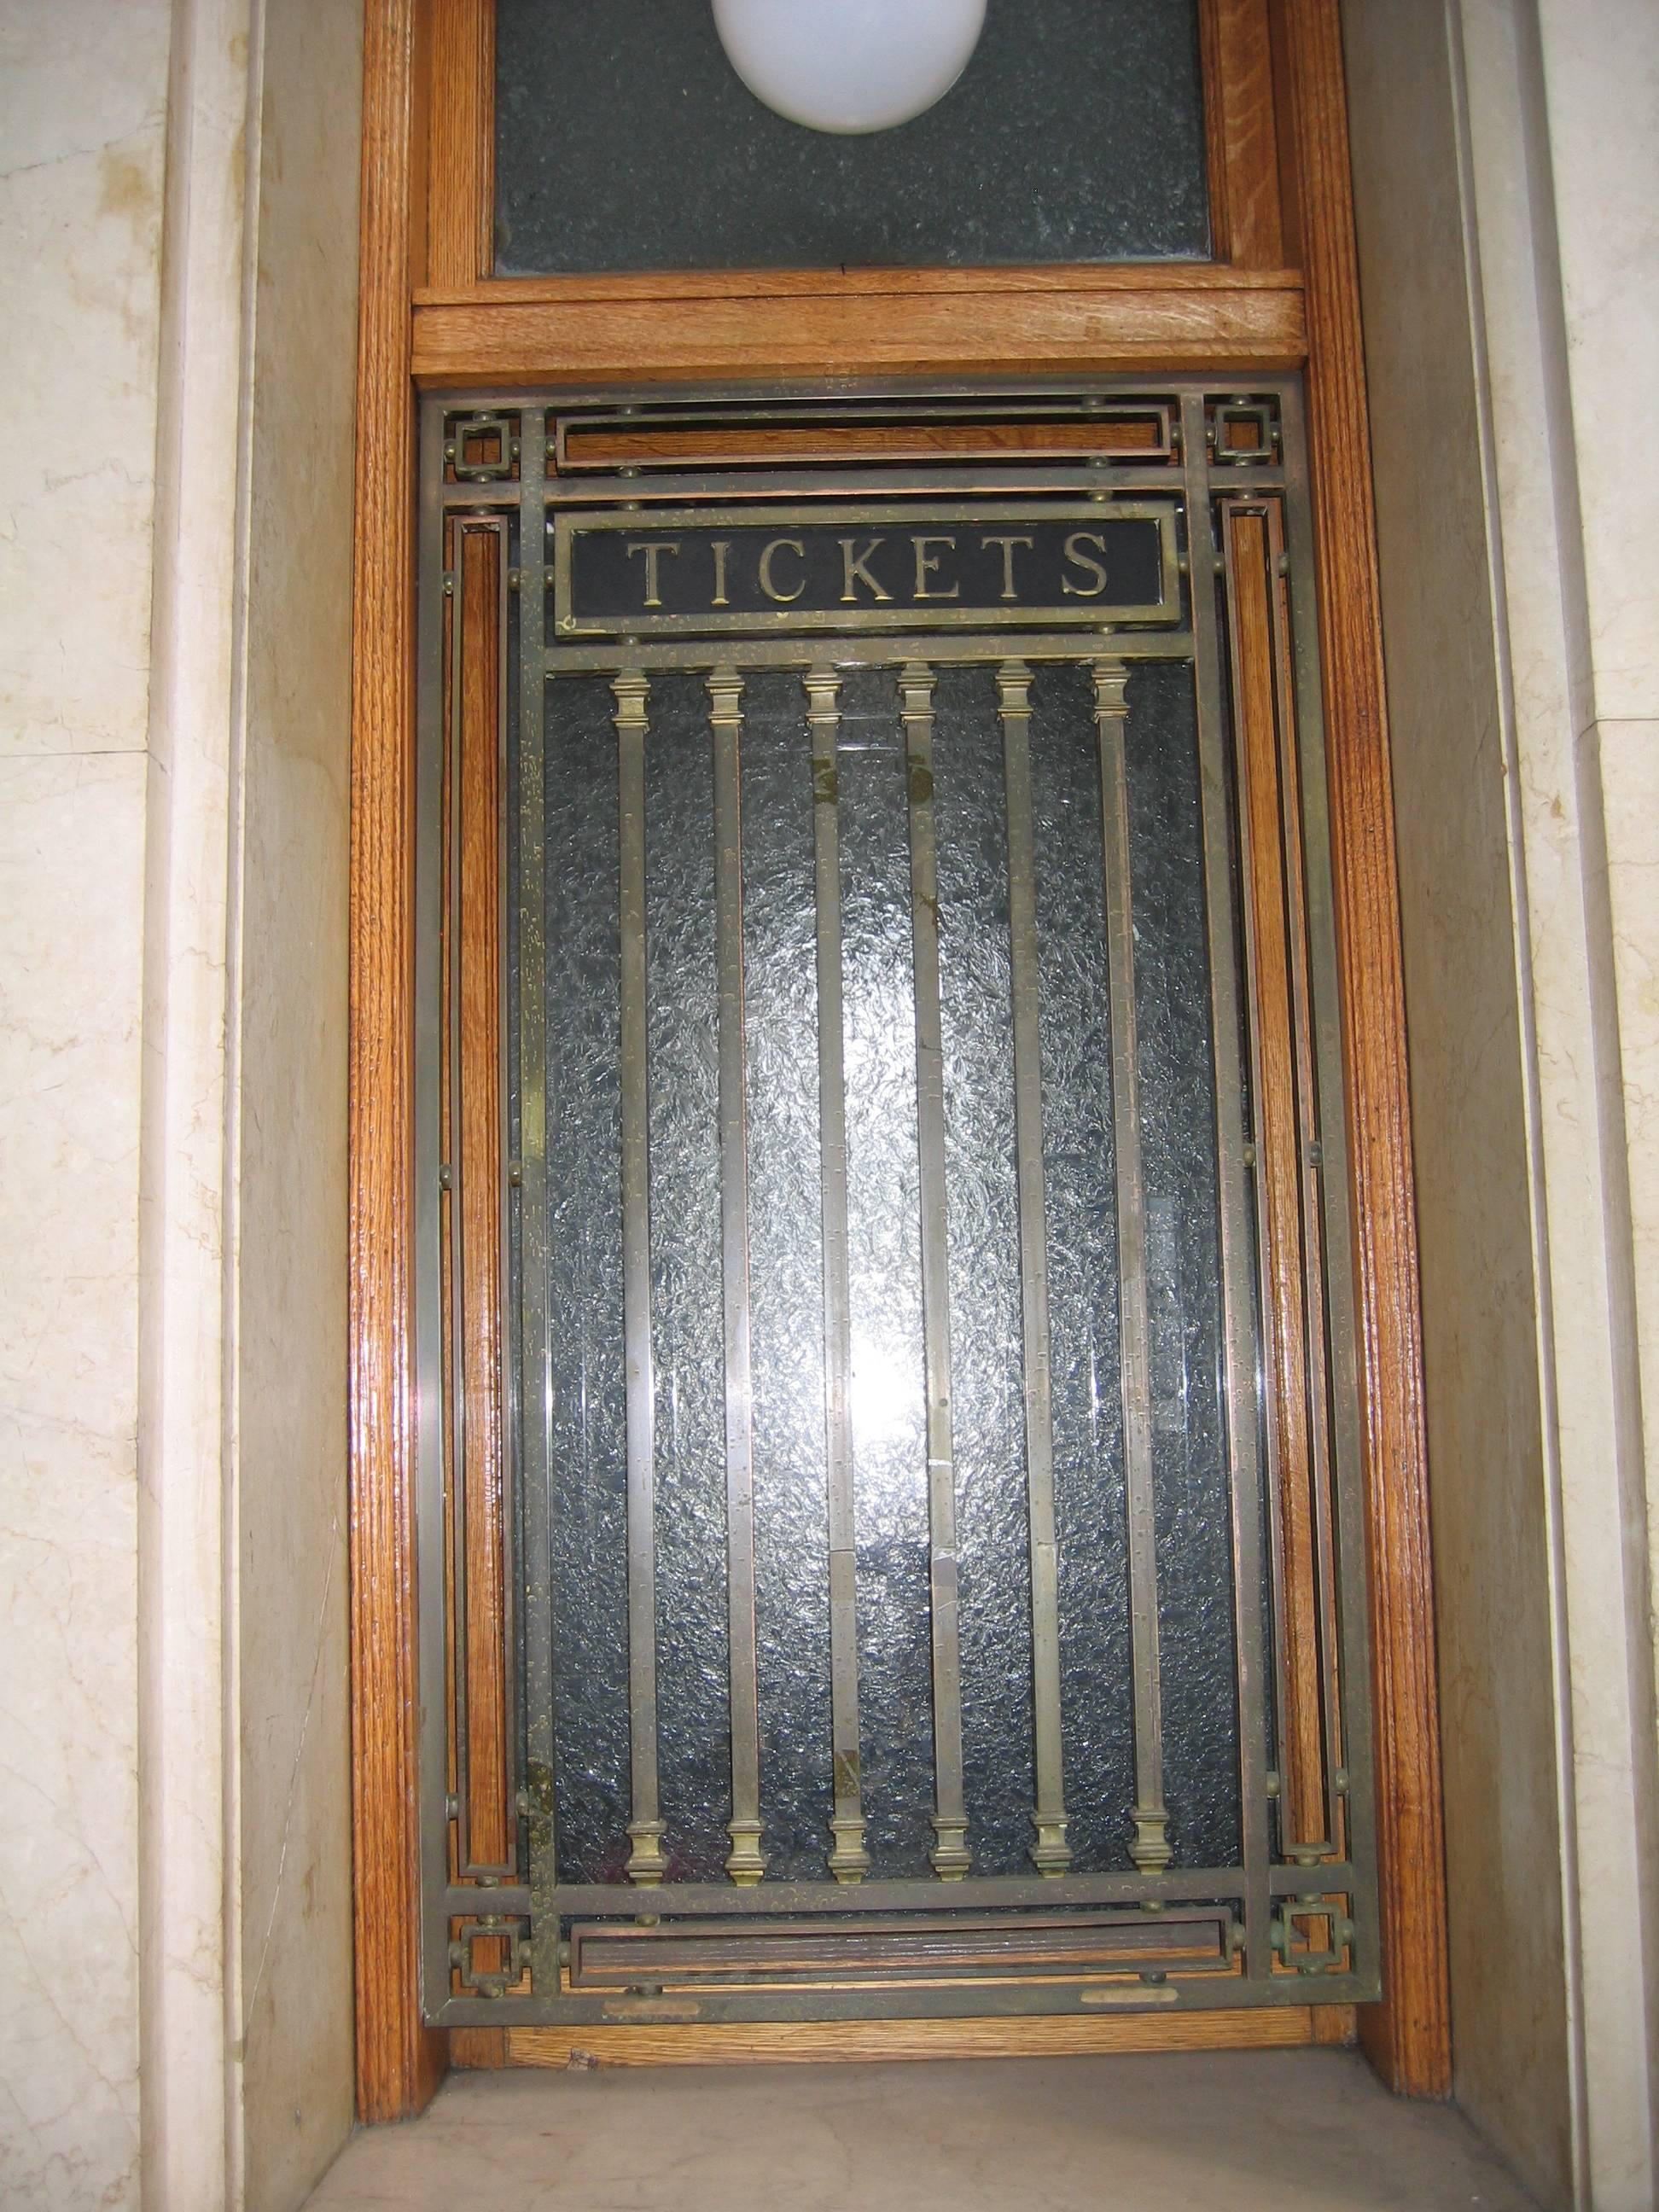 Ticket Counter, PRR Station, Johnstown, PA - 2